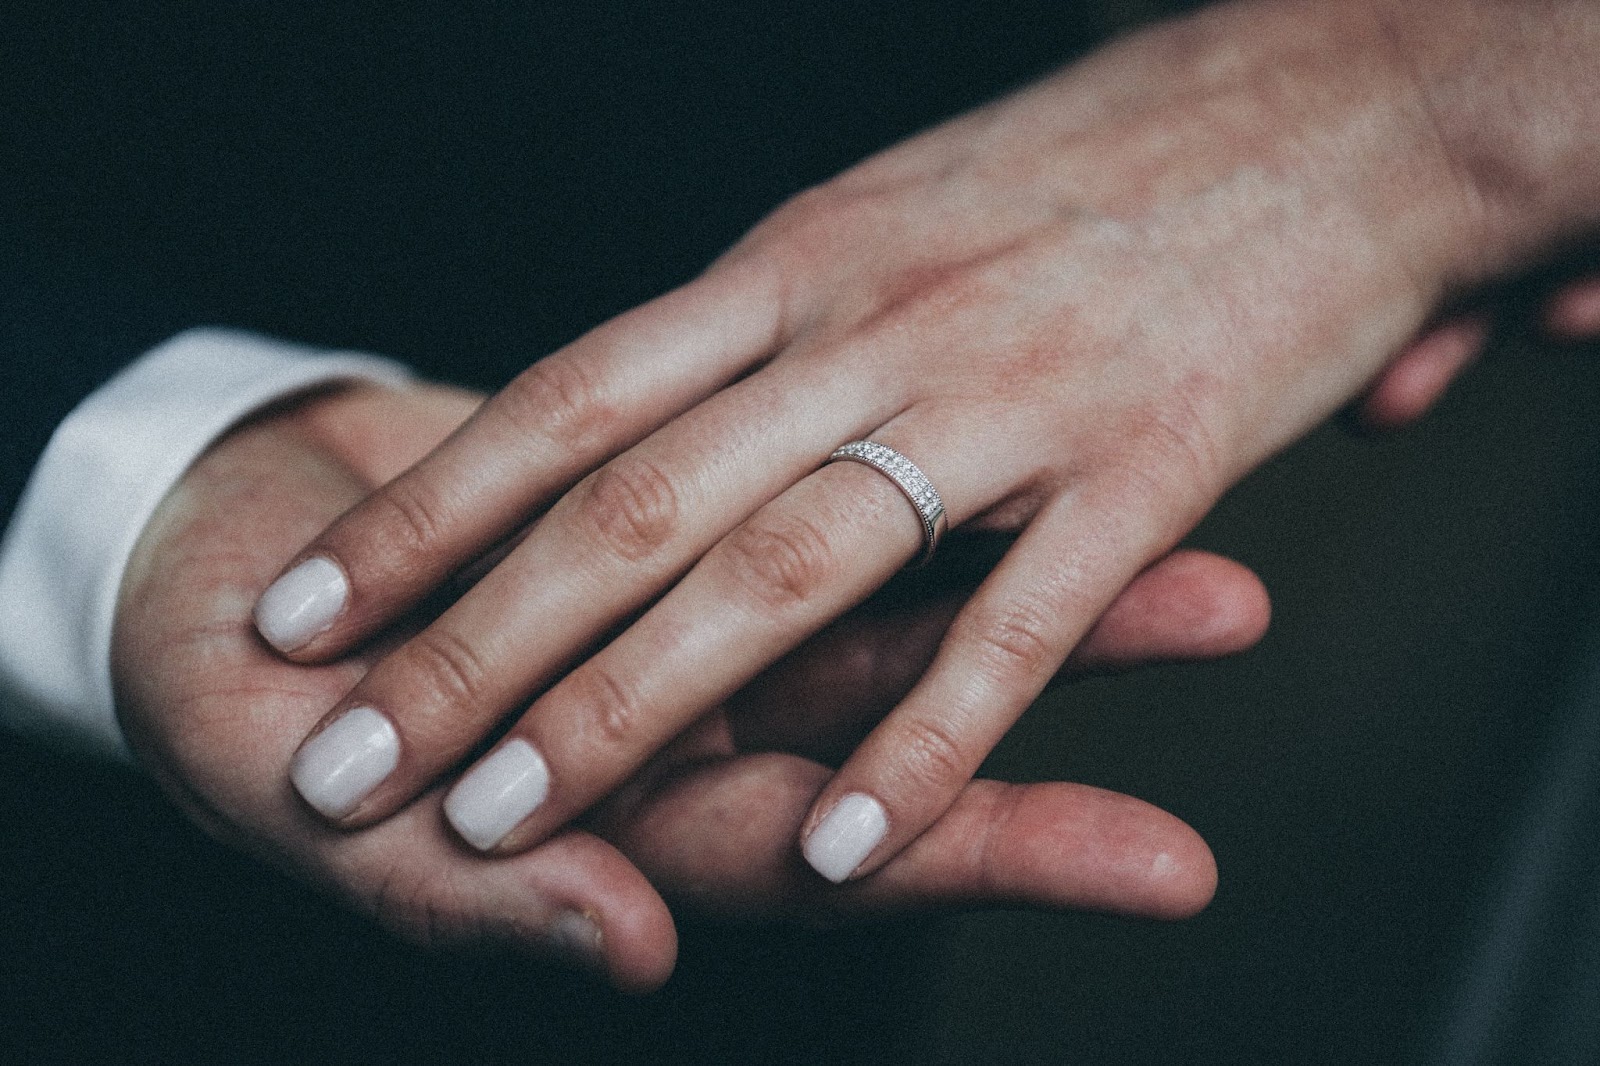 Two people holding hands, with the lady's wearing a diamond wedding band